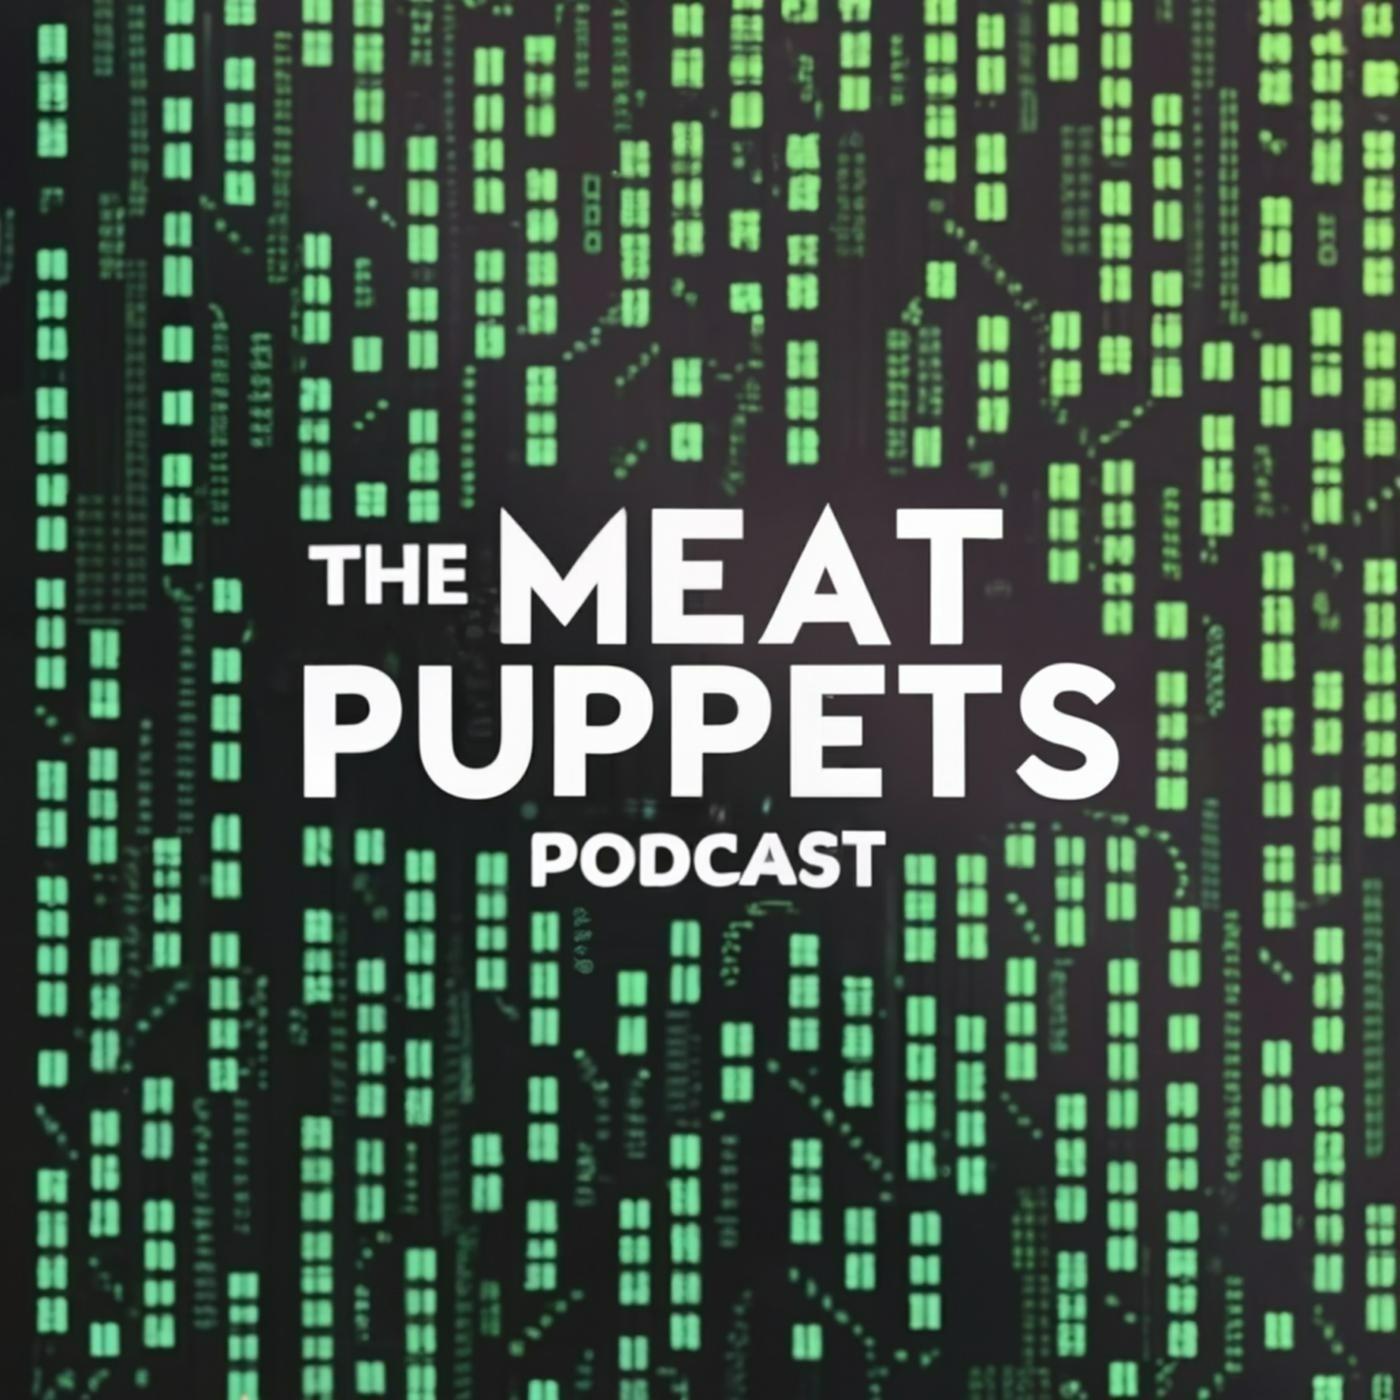 The Meat Puppets Podcast